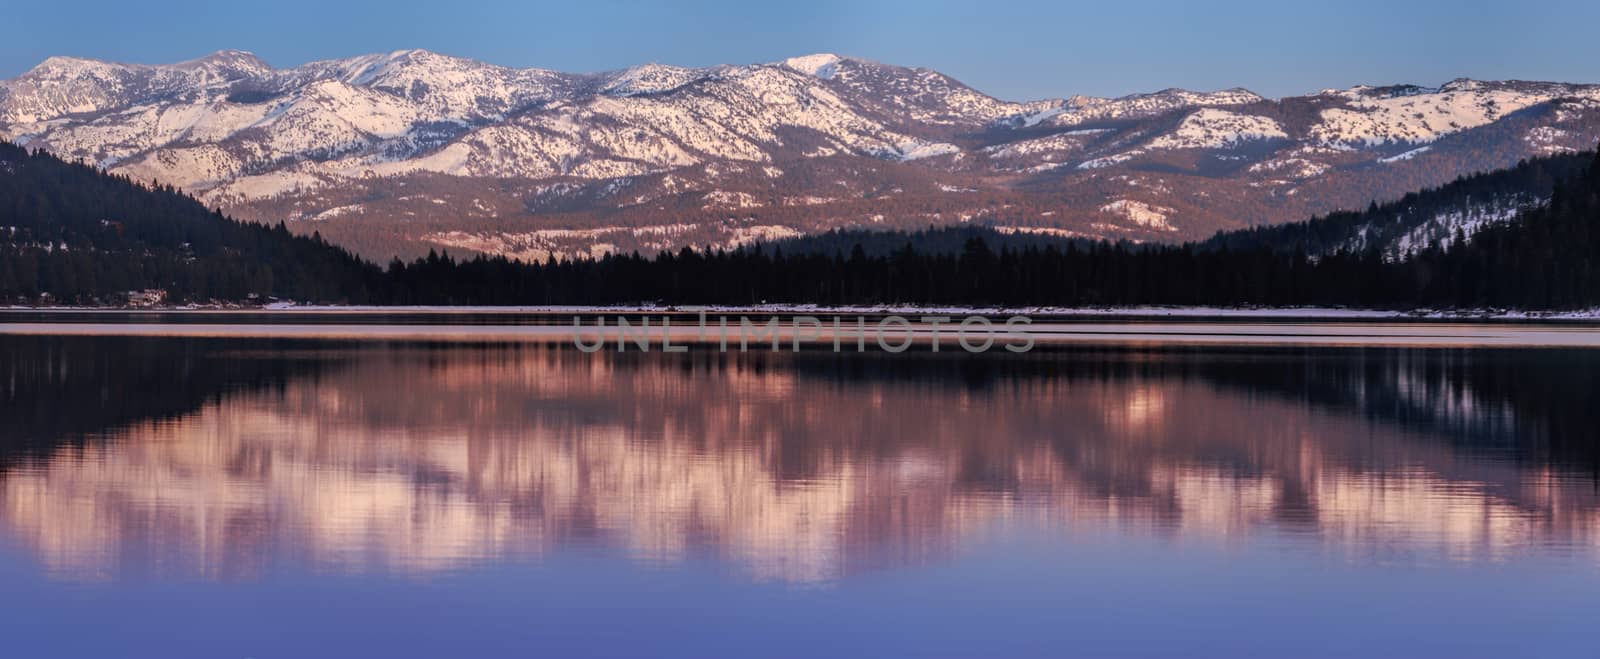 Donner Lake in Sunset by whitechild